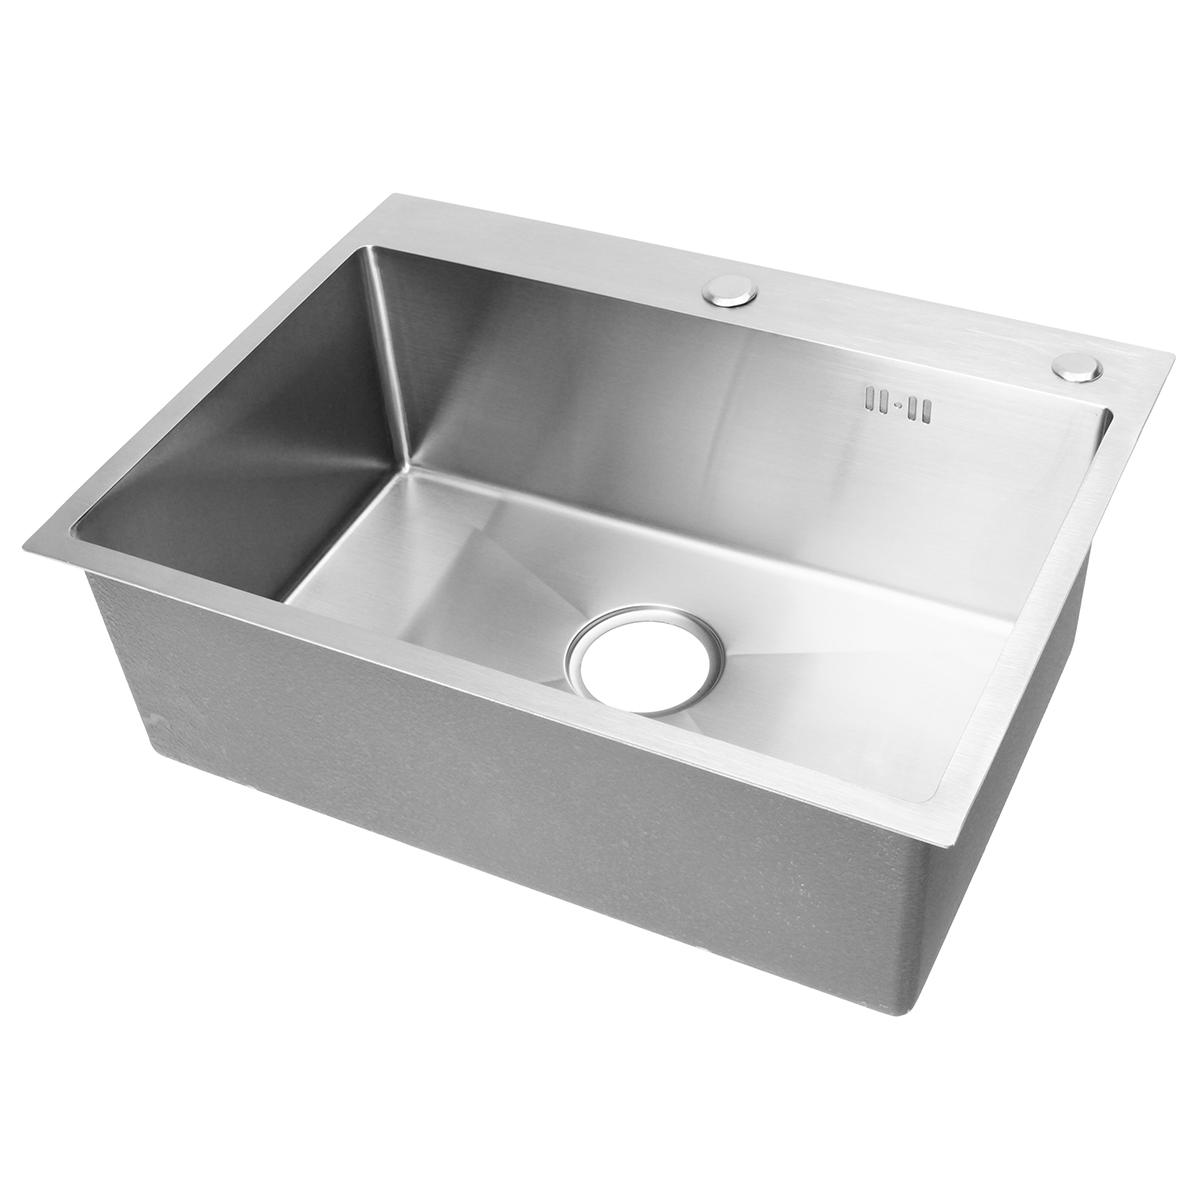 Stainless Steel Single Bowl Kitchen Sinks Commercial Home Top 60x45cm With Sewer Device Pipe Drainer